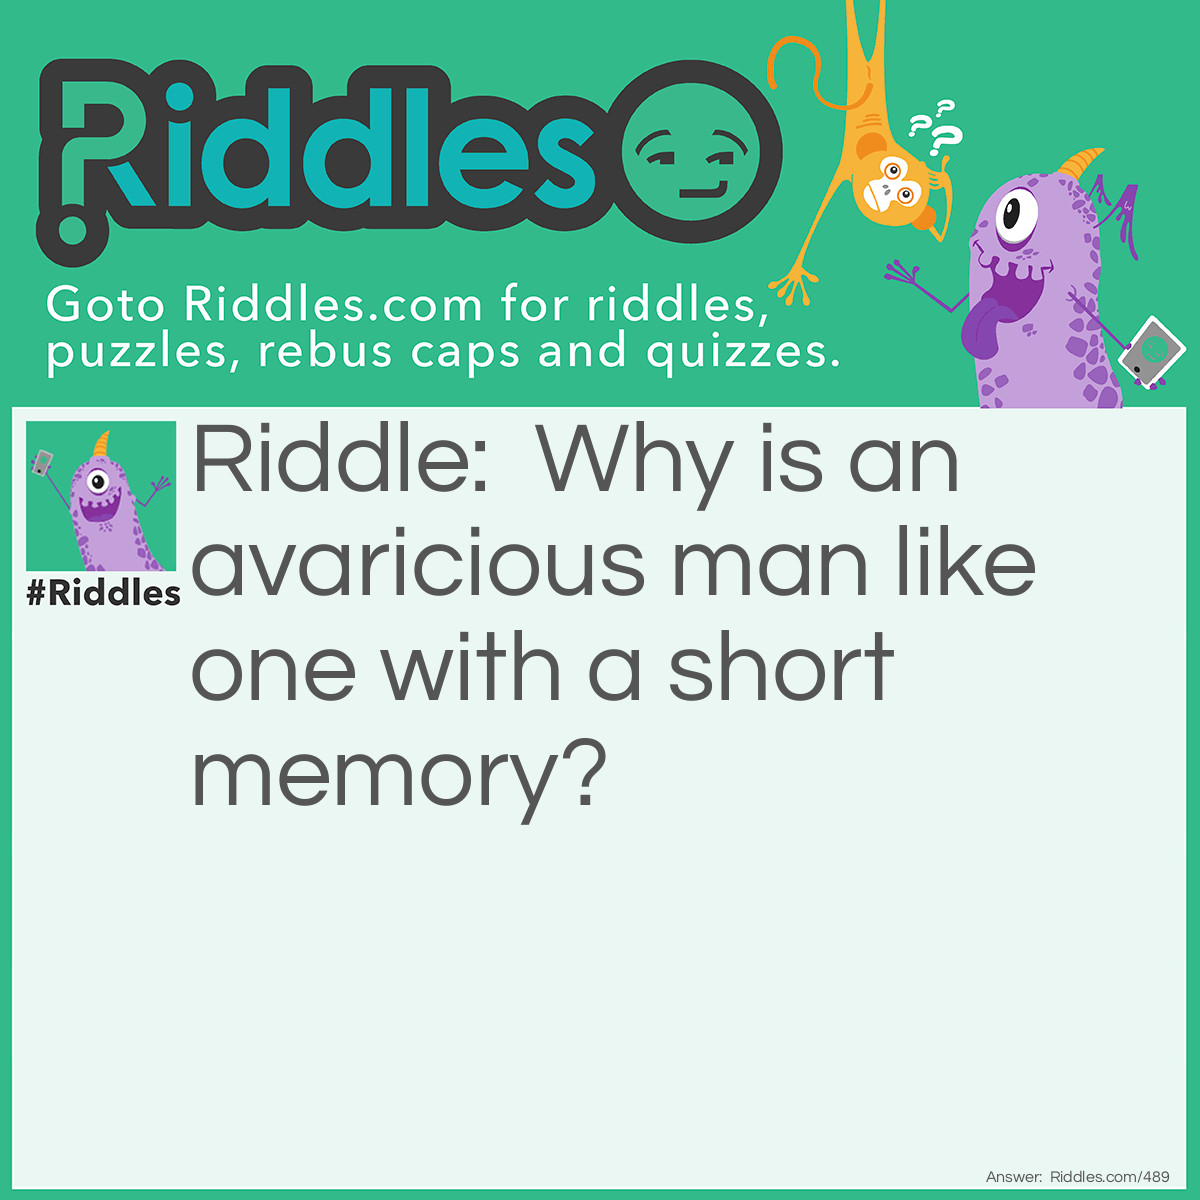 Riddle: Why is an avaricious man like one with a short memory? Answer: Because he is always for getting.